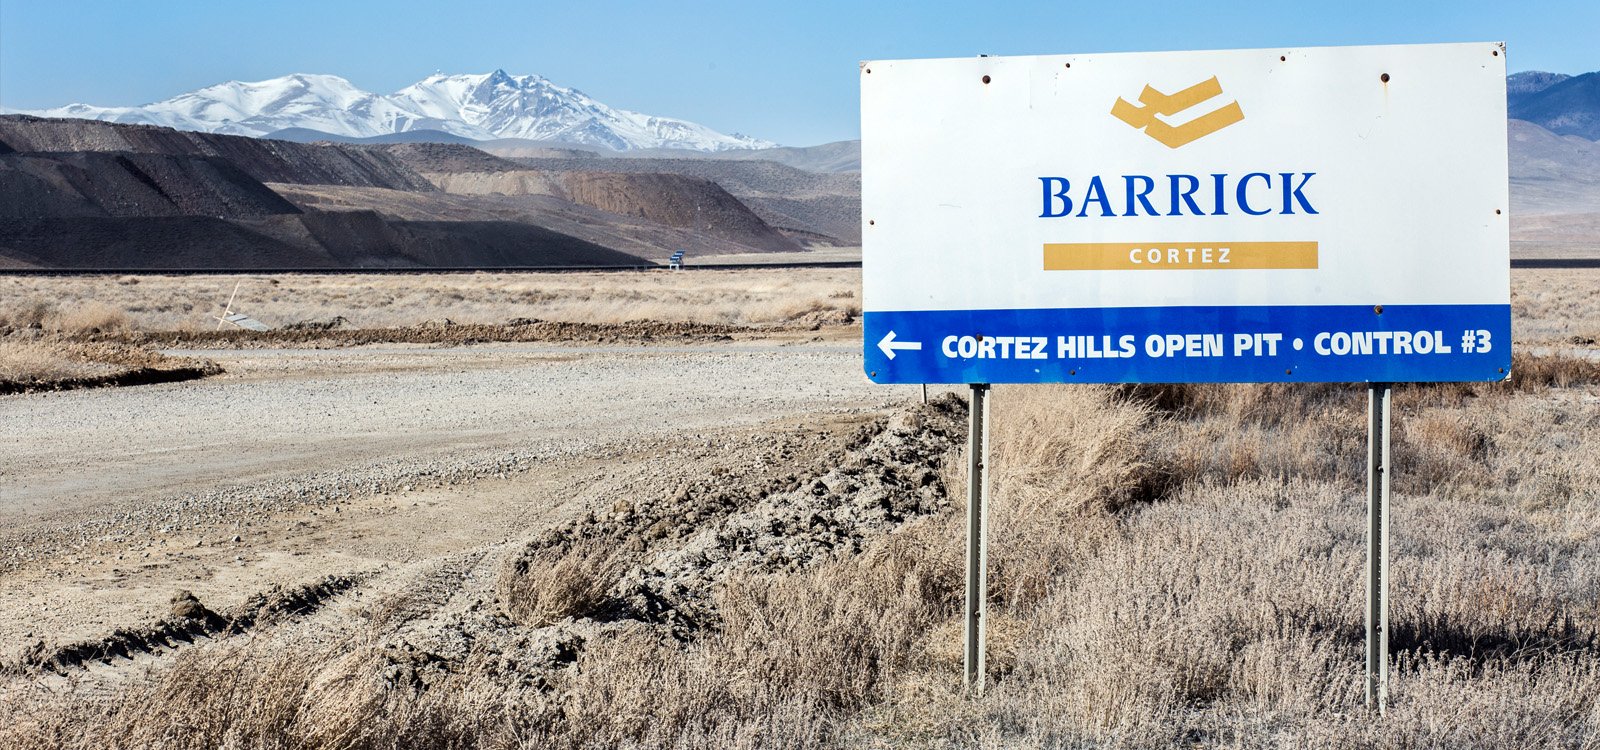 <p>Nestled between the snow-covered Cortez Mountains and the Shoshone Range, Barrick Gold’s Cortez mine has consistently been one of the world’s top 5 gold producing operations, churning out 1.06 million ounces of the yellow metal in 2016.</p>